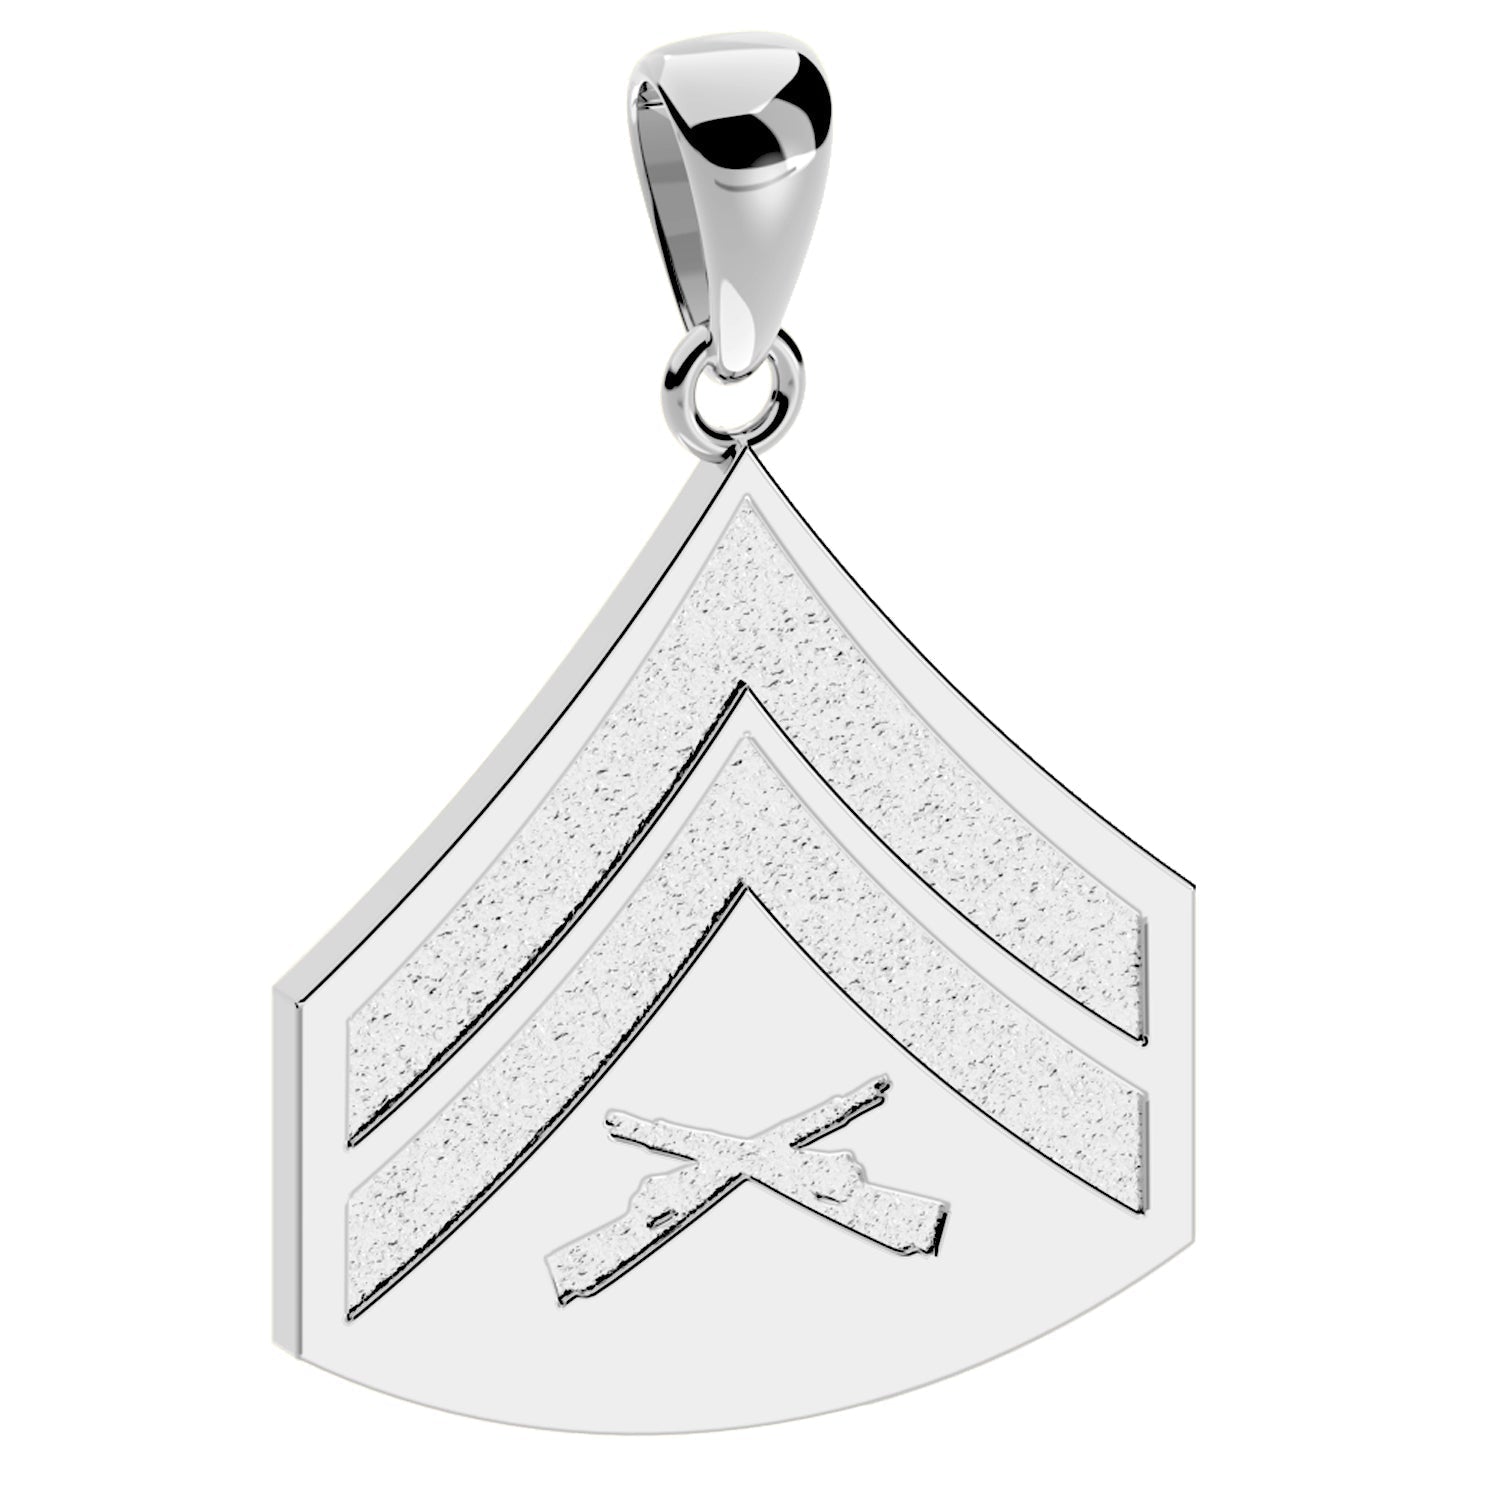 Men's 925 Sterling Silver Corporal US Marine Corps Pendant - US Jewels